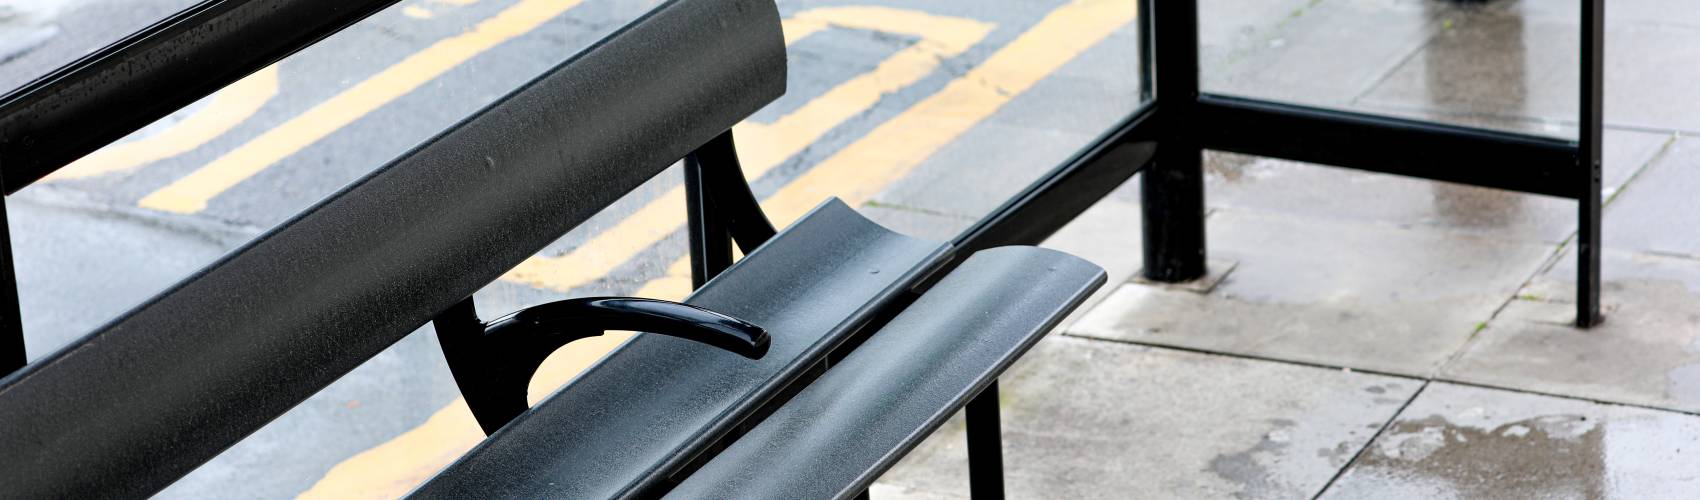 A bus shelter seat.